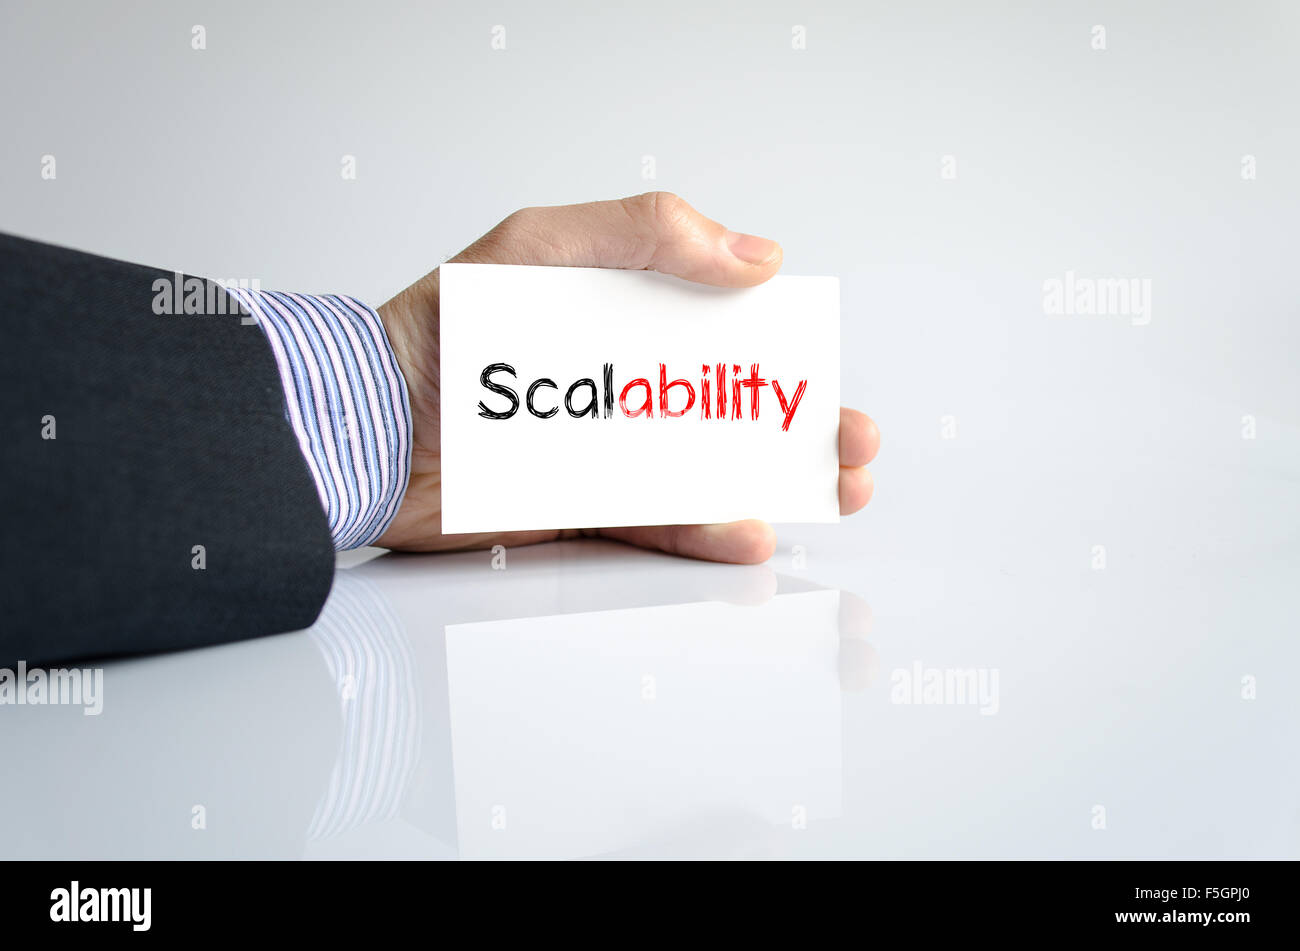 Scalability text concept isolated over white background Stock Photo